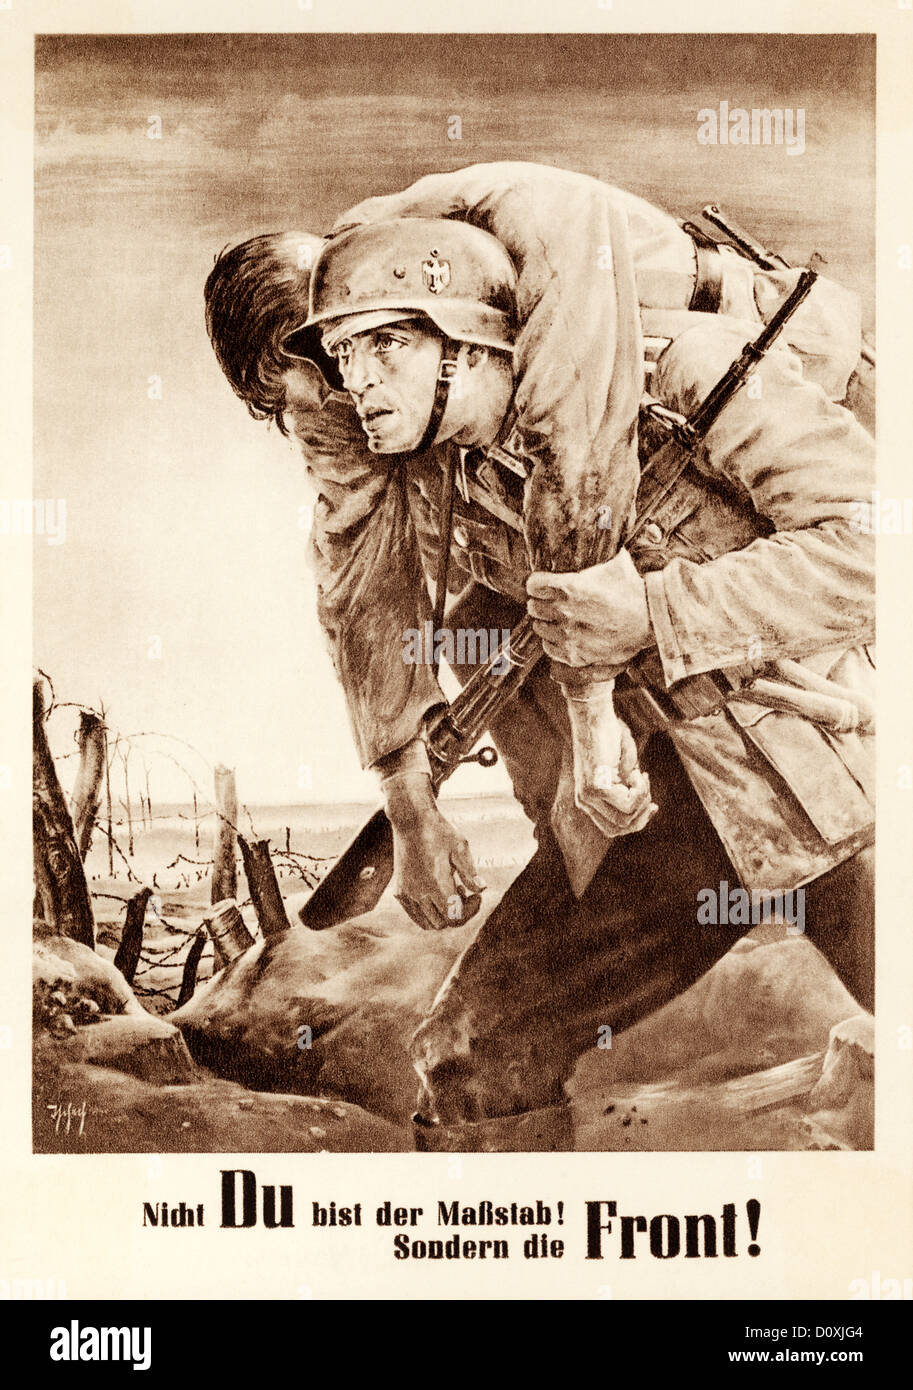 Front, East, soldier, wounded, comrade, Postcard, Third Reich, World War II, Germany, 1943 Stock Photo